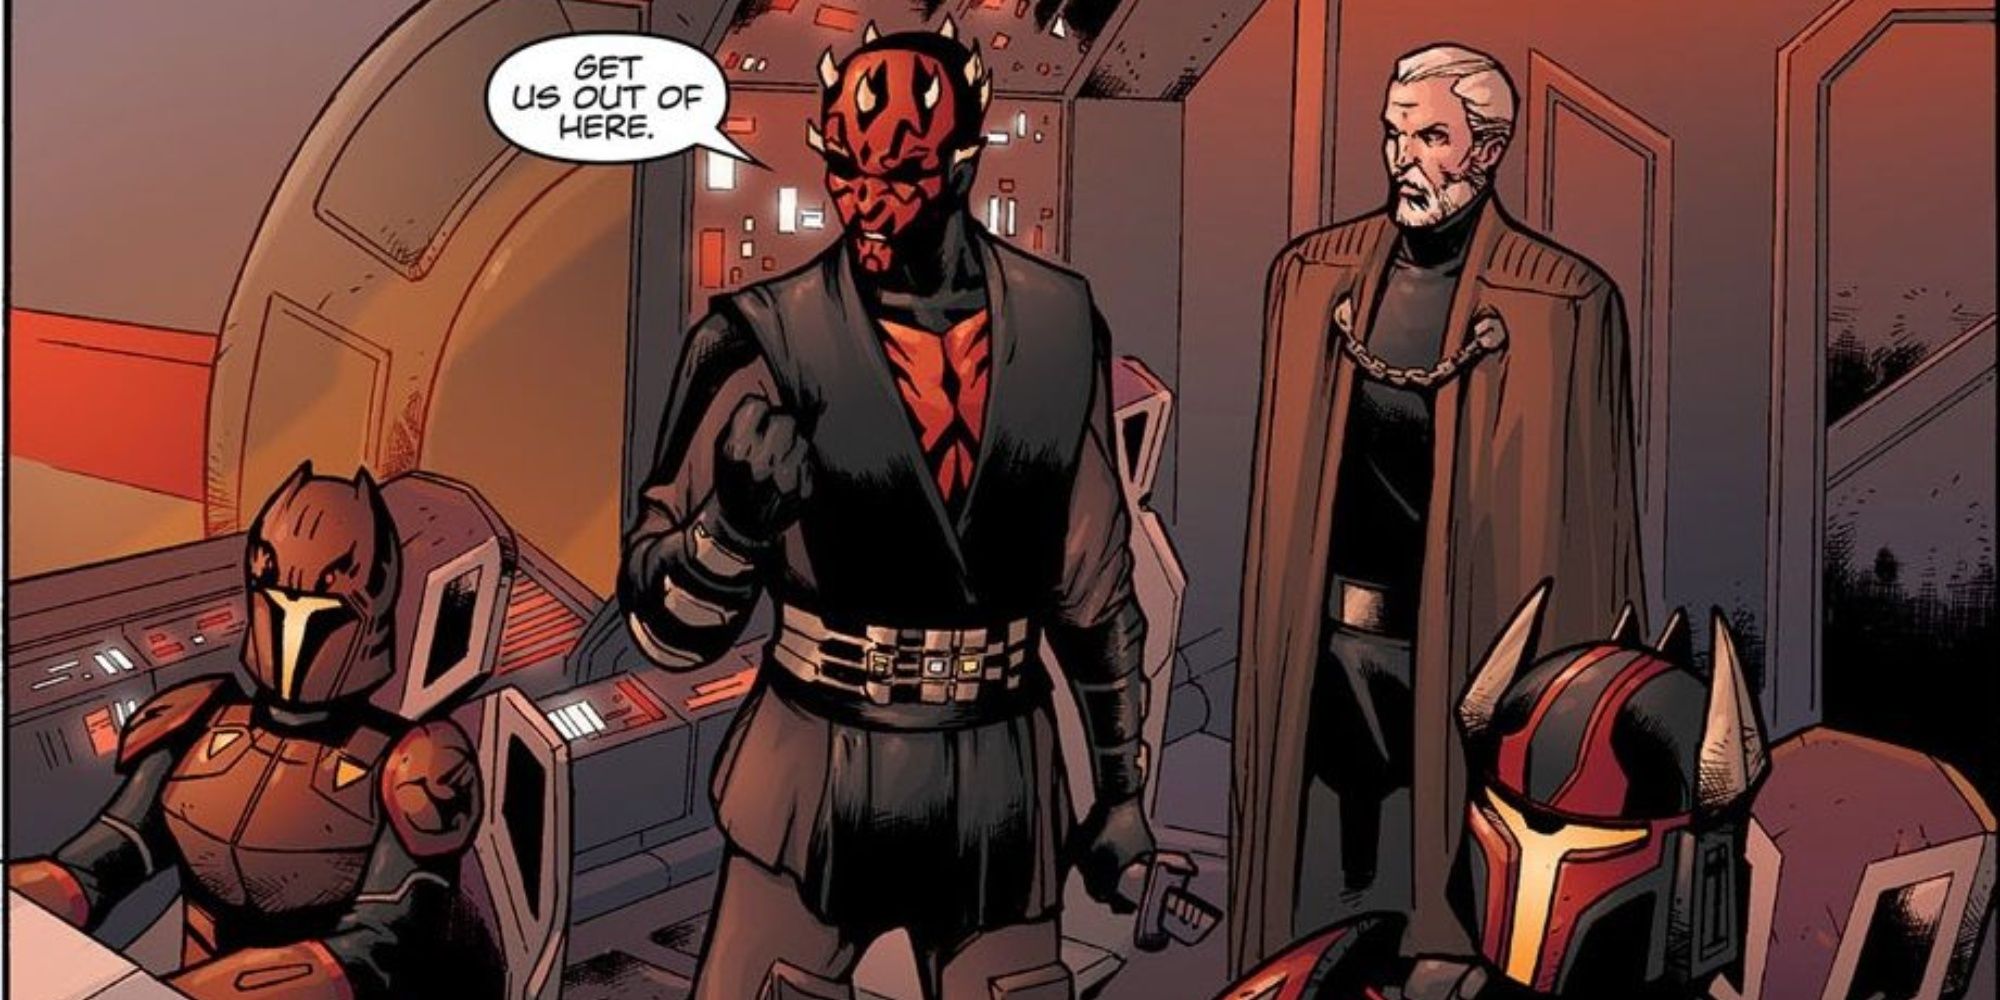 Star Wars 10 Huge Things You Only Know If You’ve Read The Comics And Novels